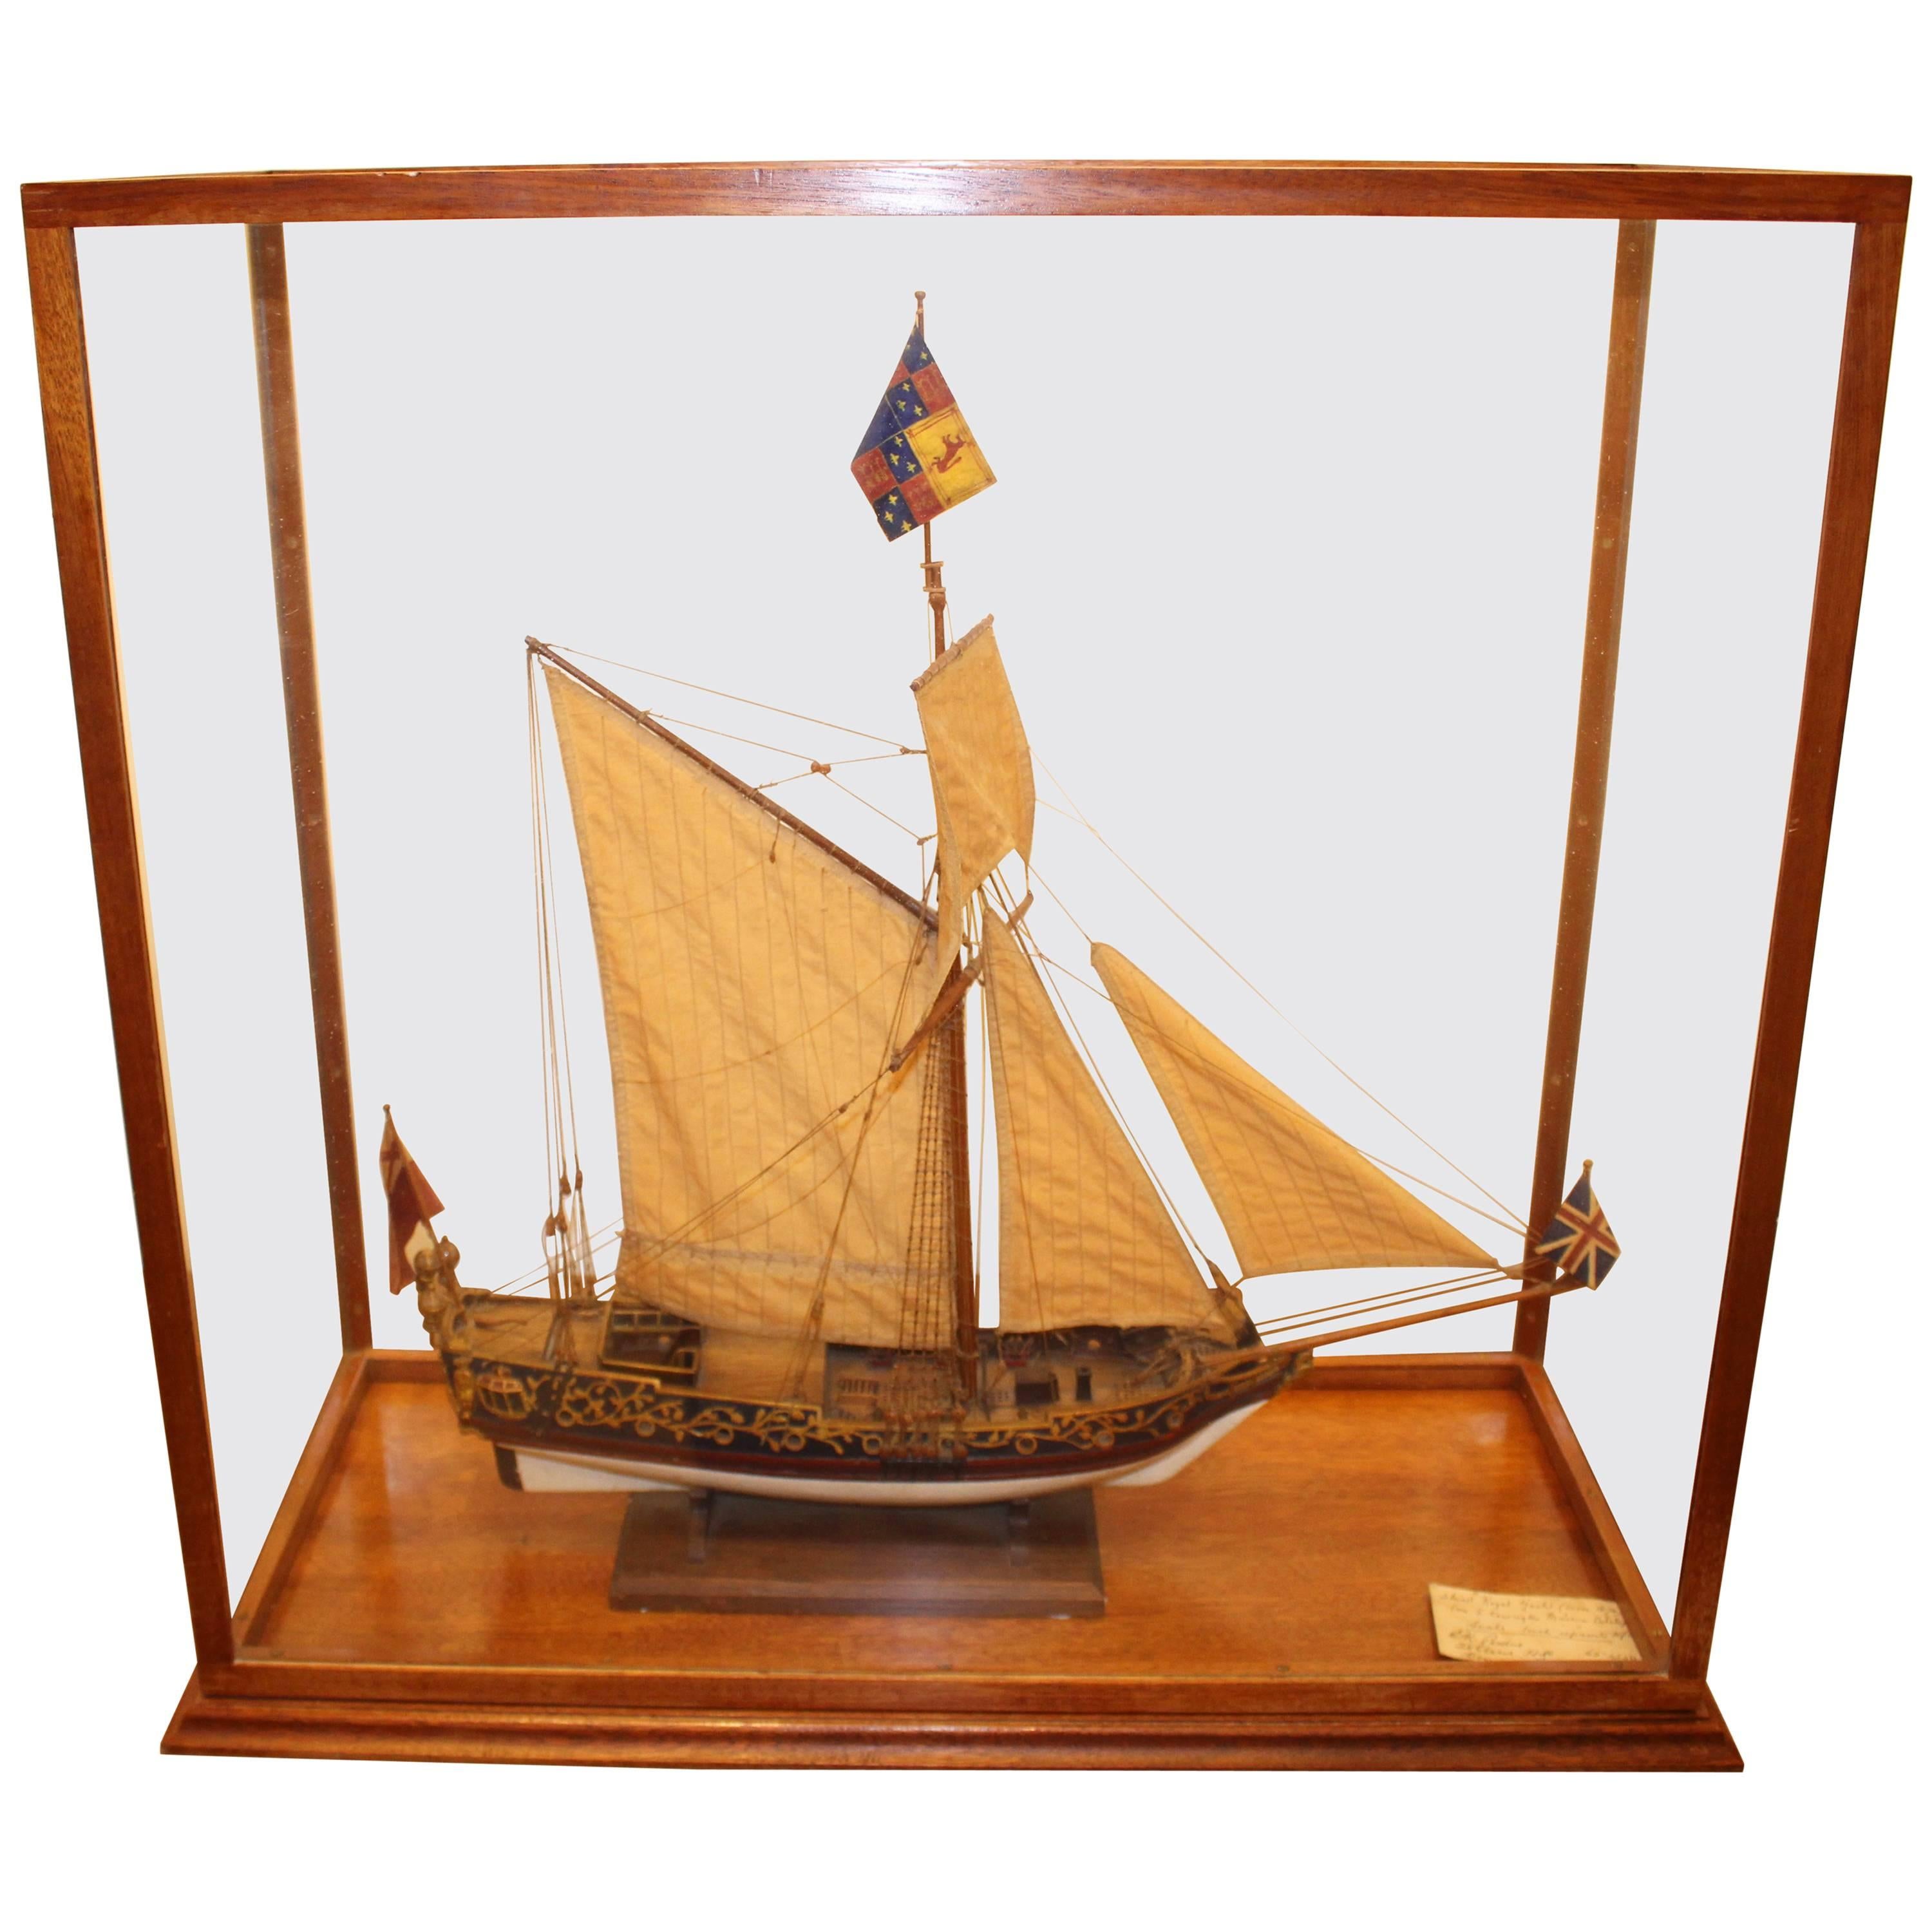 Model of the Stuart Royal Yacht in Wooden Glazed Display Cabinet, circa 1674